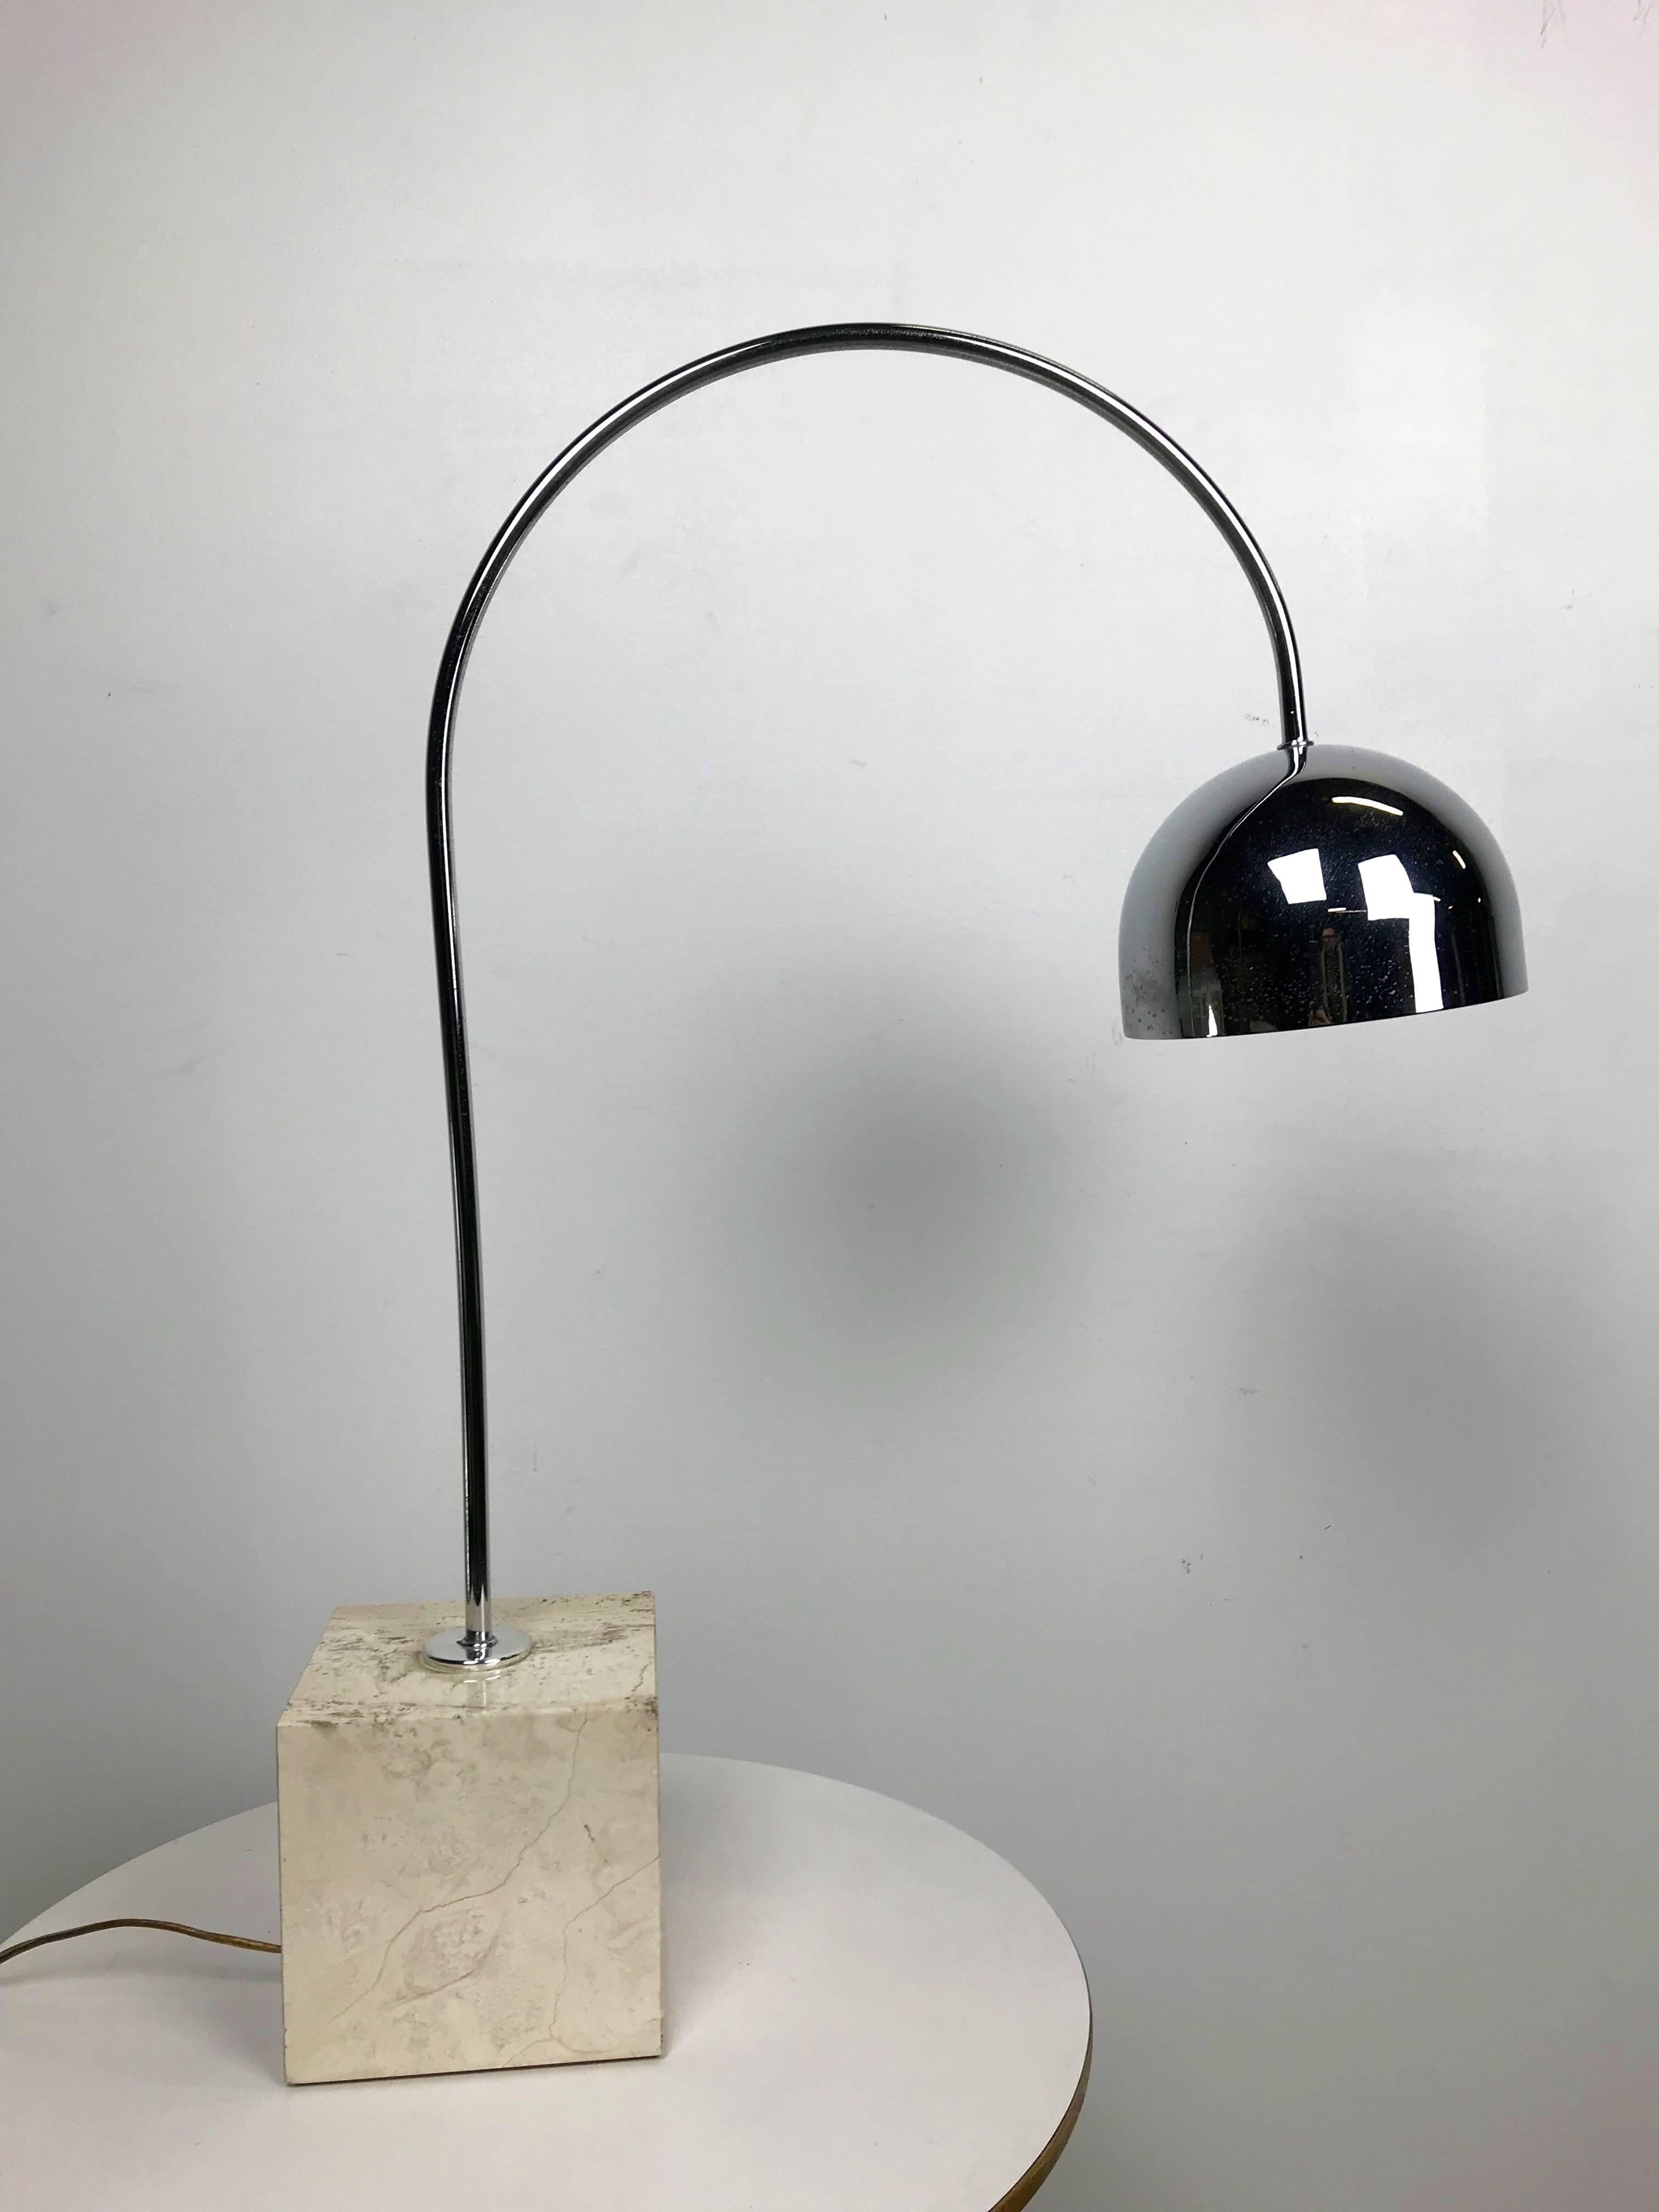 Here is a wonderfully minimal Italian travertine marble and chrome table lamp with a Spherical shade. Use it on your desk or as accent lighting. An elegant design from the 1970s.